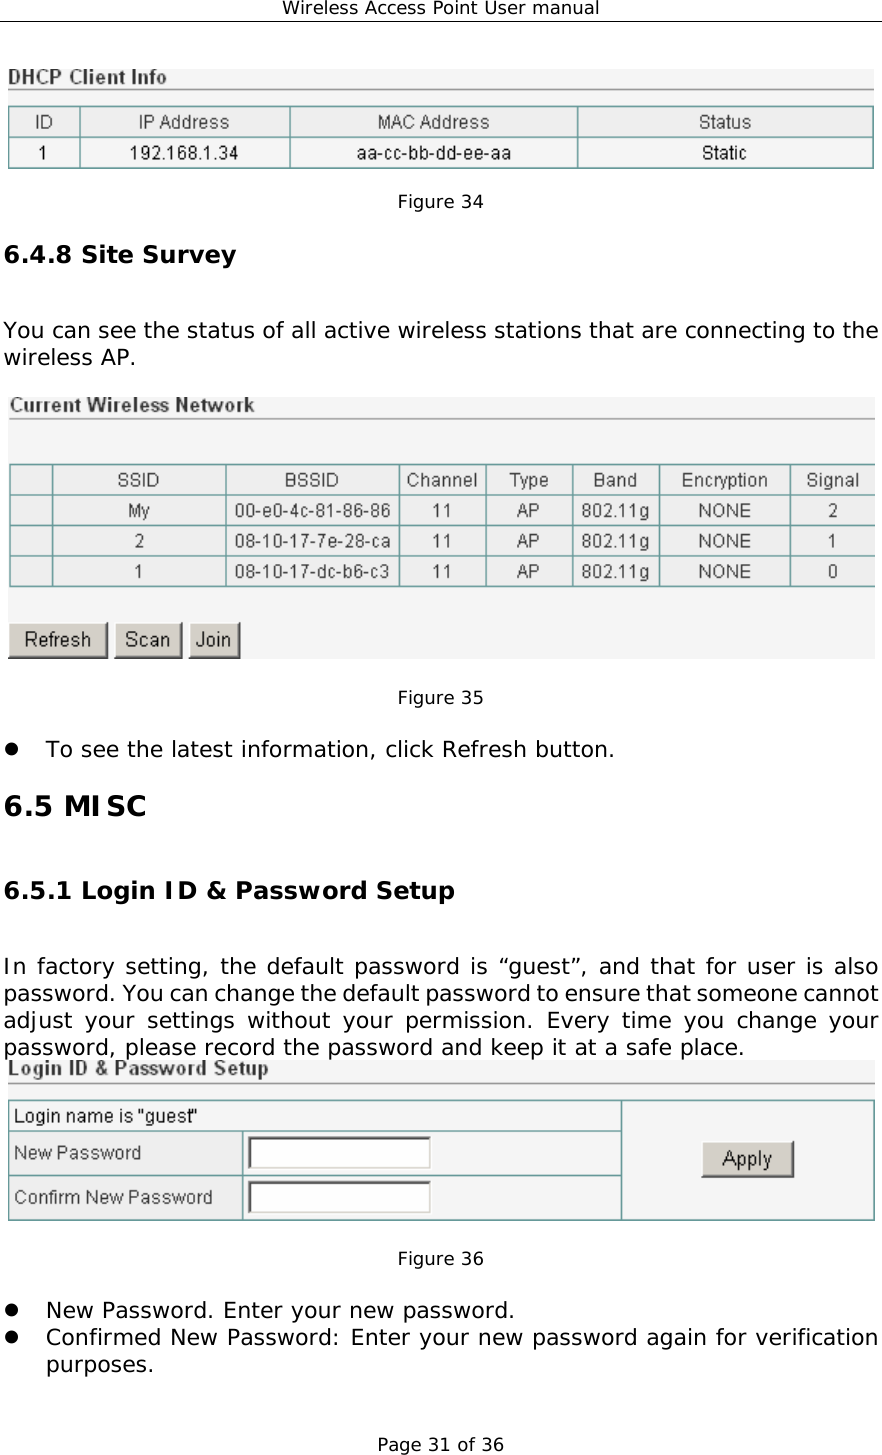 Wireless Access Point User manual Page 31 of 36    Figure 34 6.4.8 Site Survey You can see the status of all active wireless stations that are connecting to the wireless AP.     Figure 35  z To see the latest information, click Refresh button. 6.5 MISC 6.5.1 Login ID &amp; Password Setup In factory setting, the default password is “guest”, and that for user is also password. You can change the default password to ensure that someone cannot adjust your settings without your permission. Every time you change your password, please record the password and keep it at a safe place.    Figure 36  z New Password. Enter your new password. z Confirmed New Password: Enter your new password again for verification purposes. 